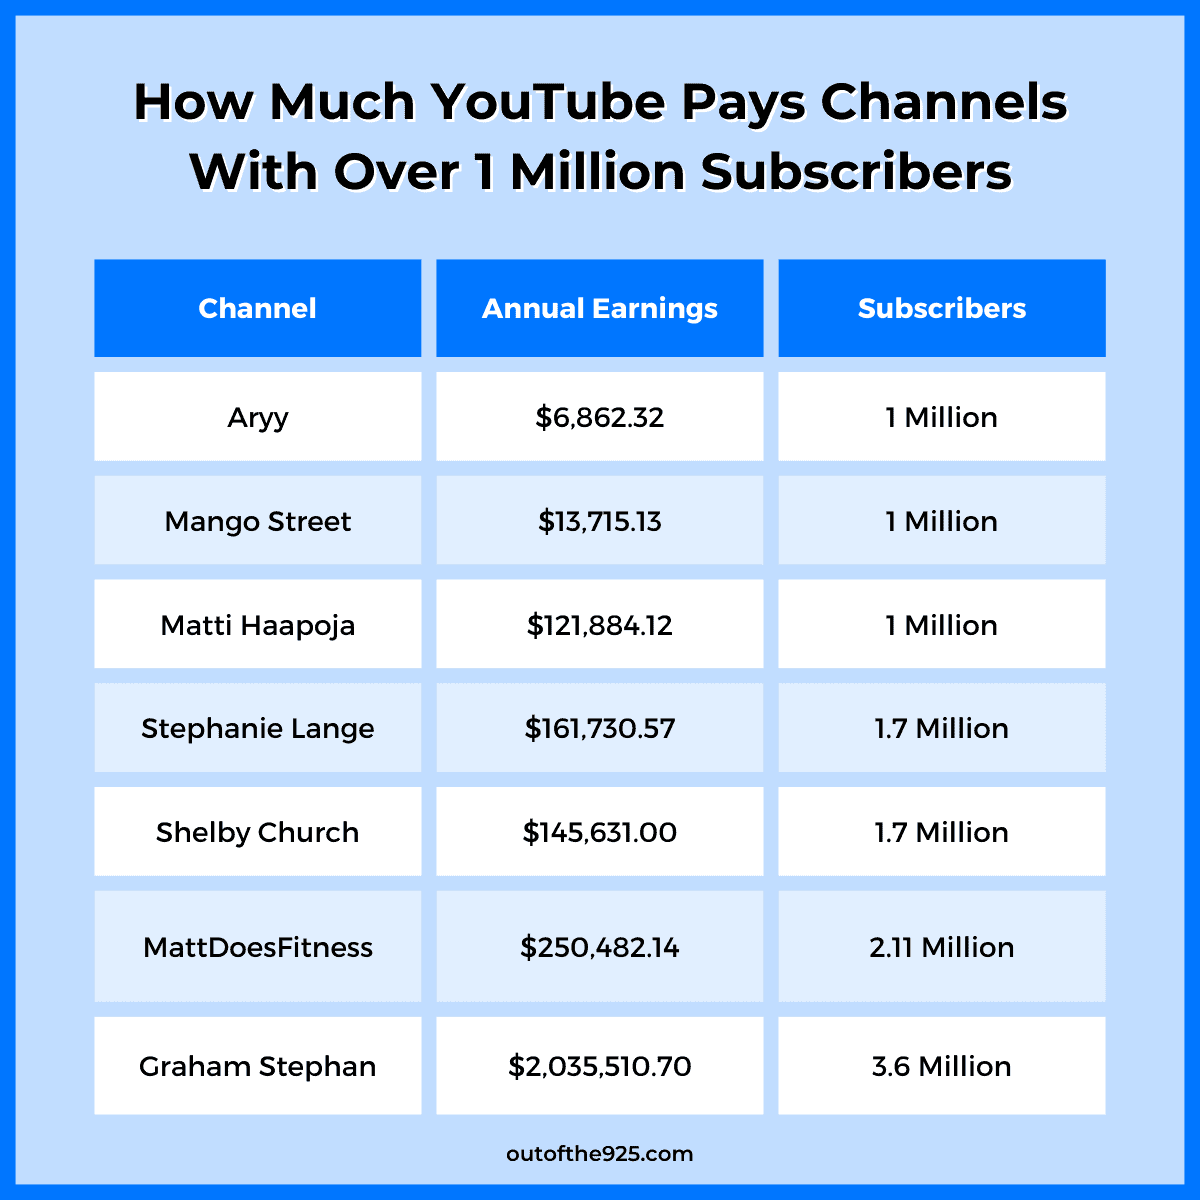 How Much YouTube Pays Channels With Over 1 Million Subscribers